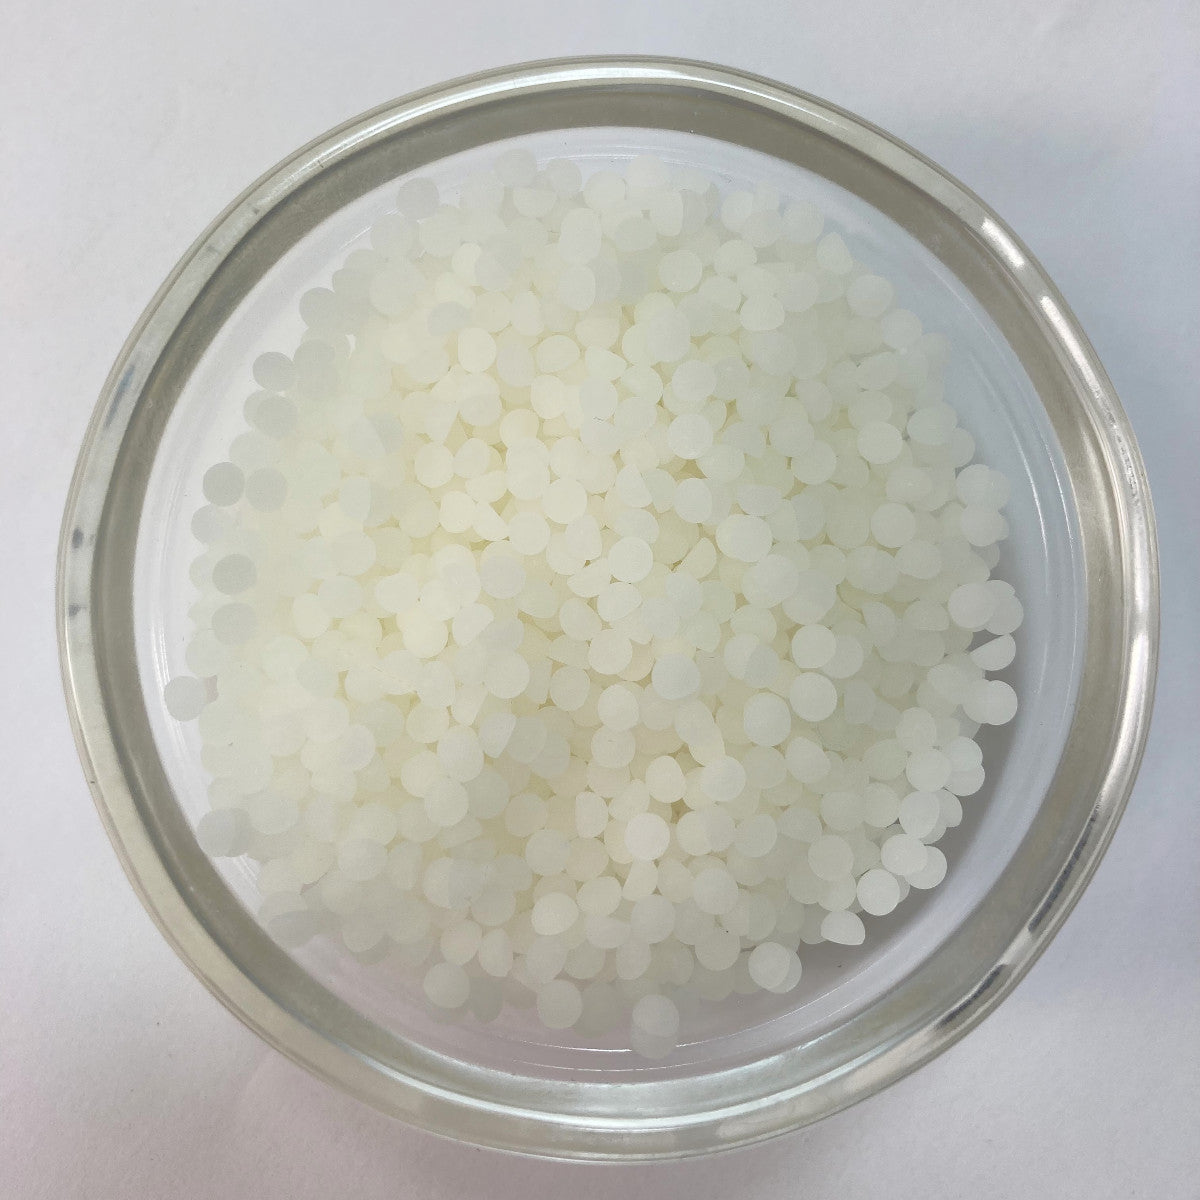 Emulsifying Wax for Lotion Making